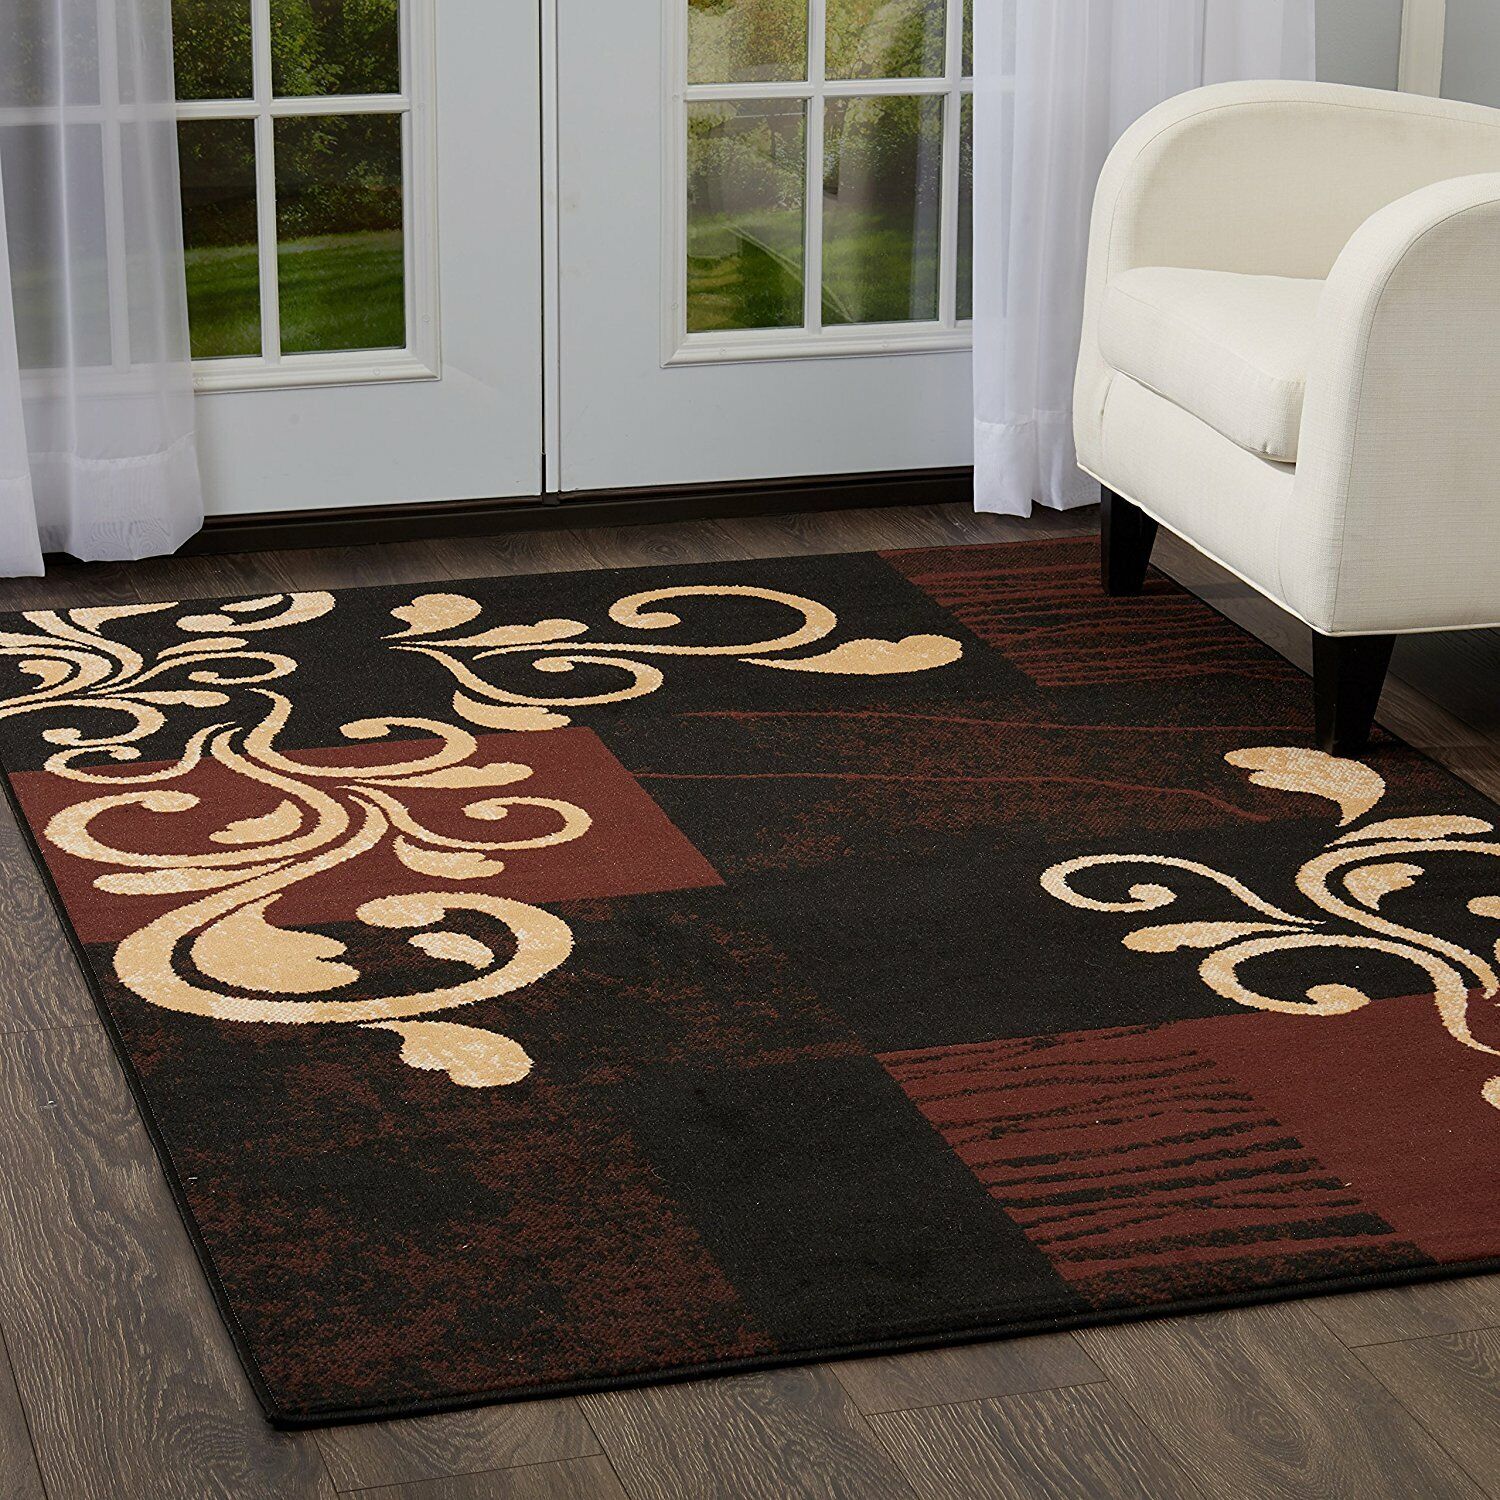 Black Brown Gold Scroll 3 pc Area Rug Set Accent Mat Carpet Runner 5 x 7 ft 2x3 Unknown Does Not Apply - фотография #6